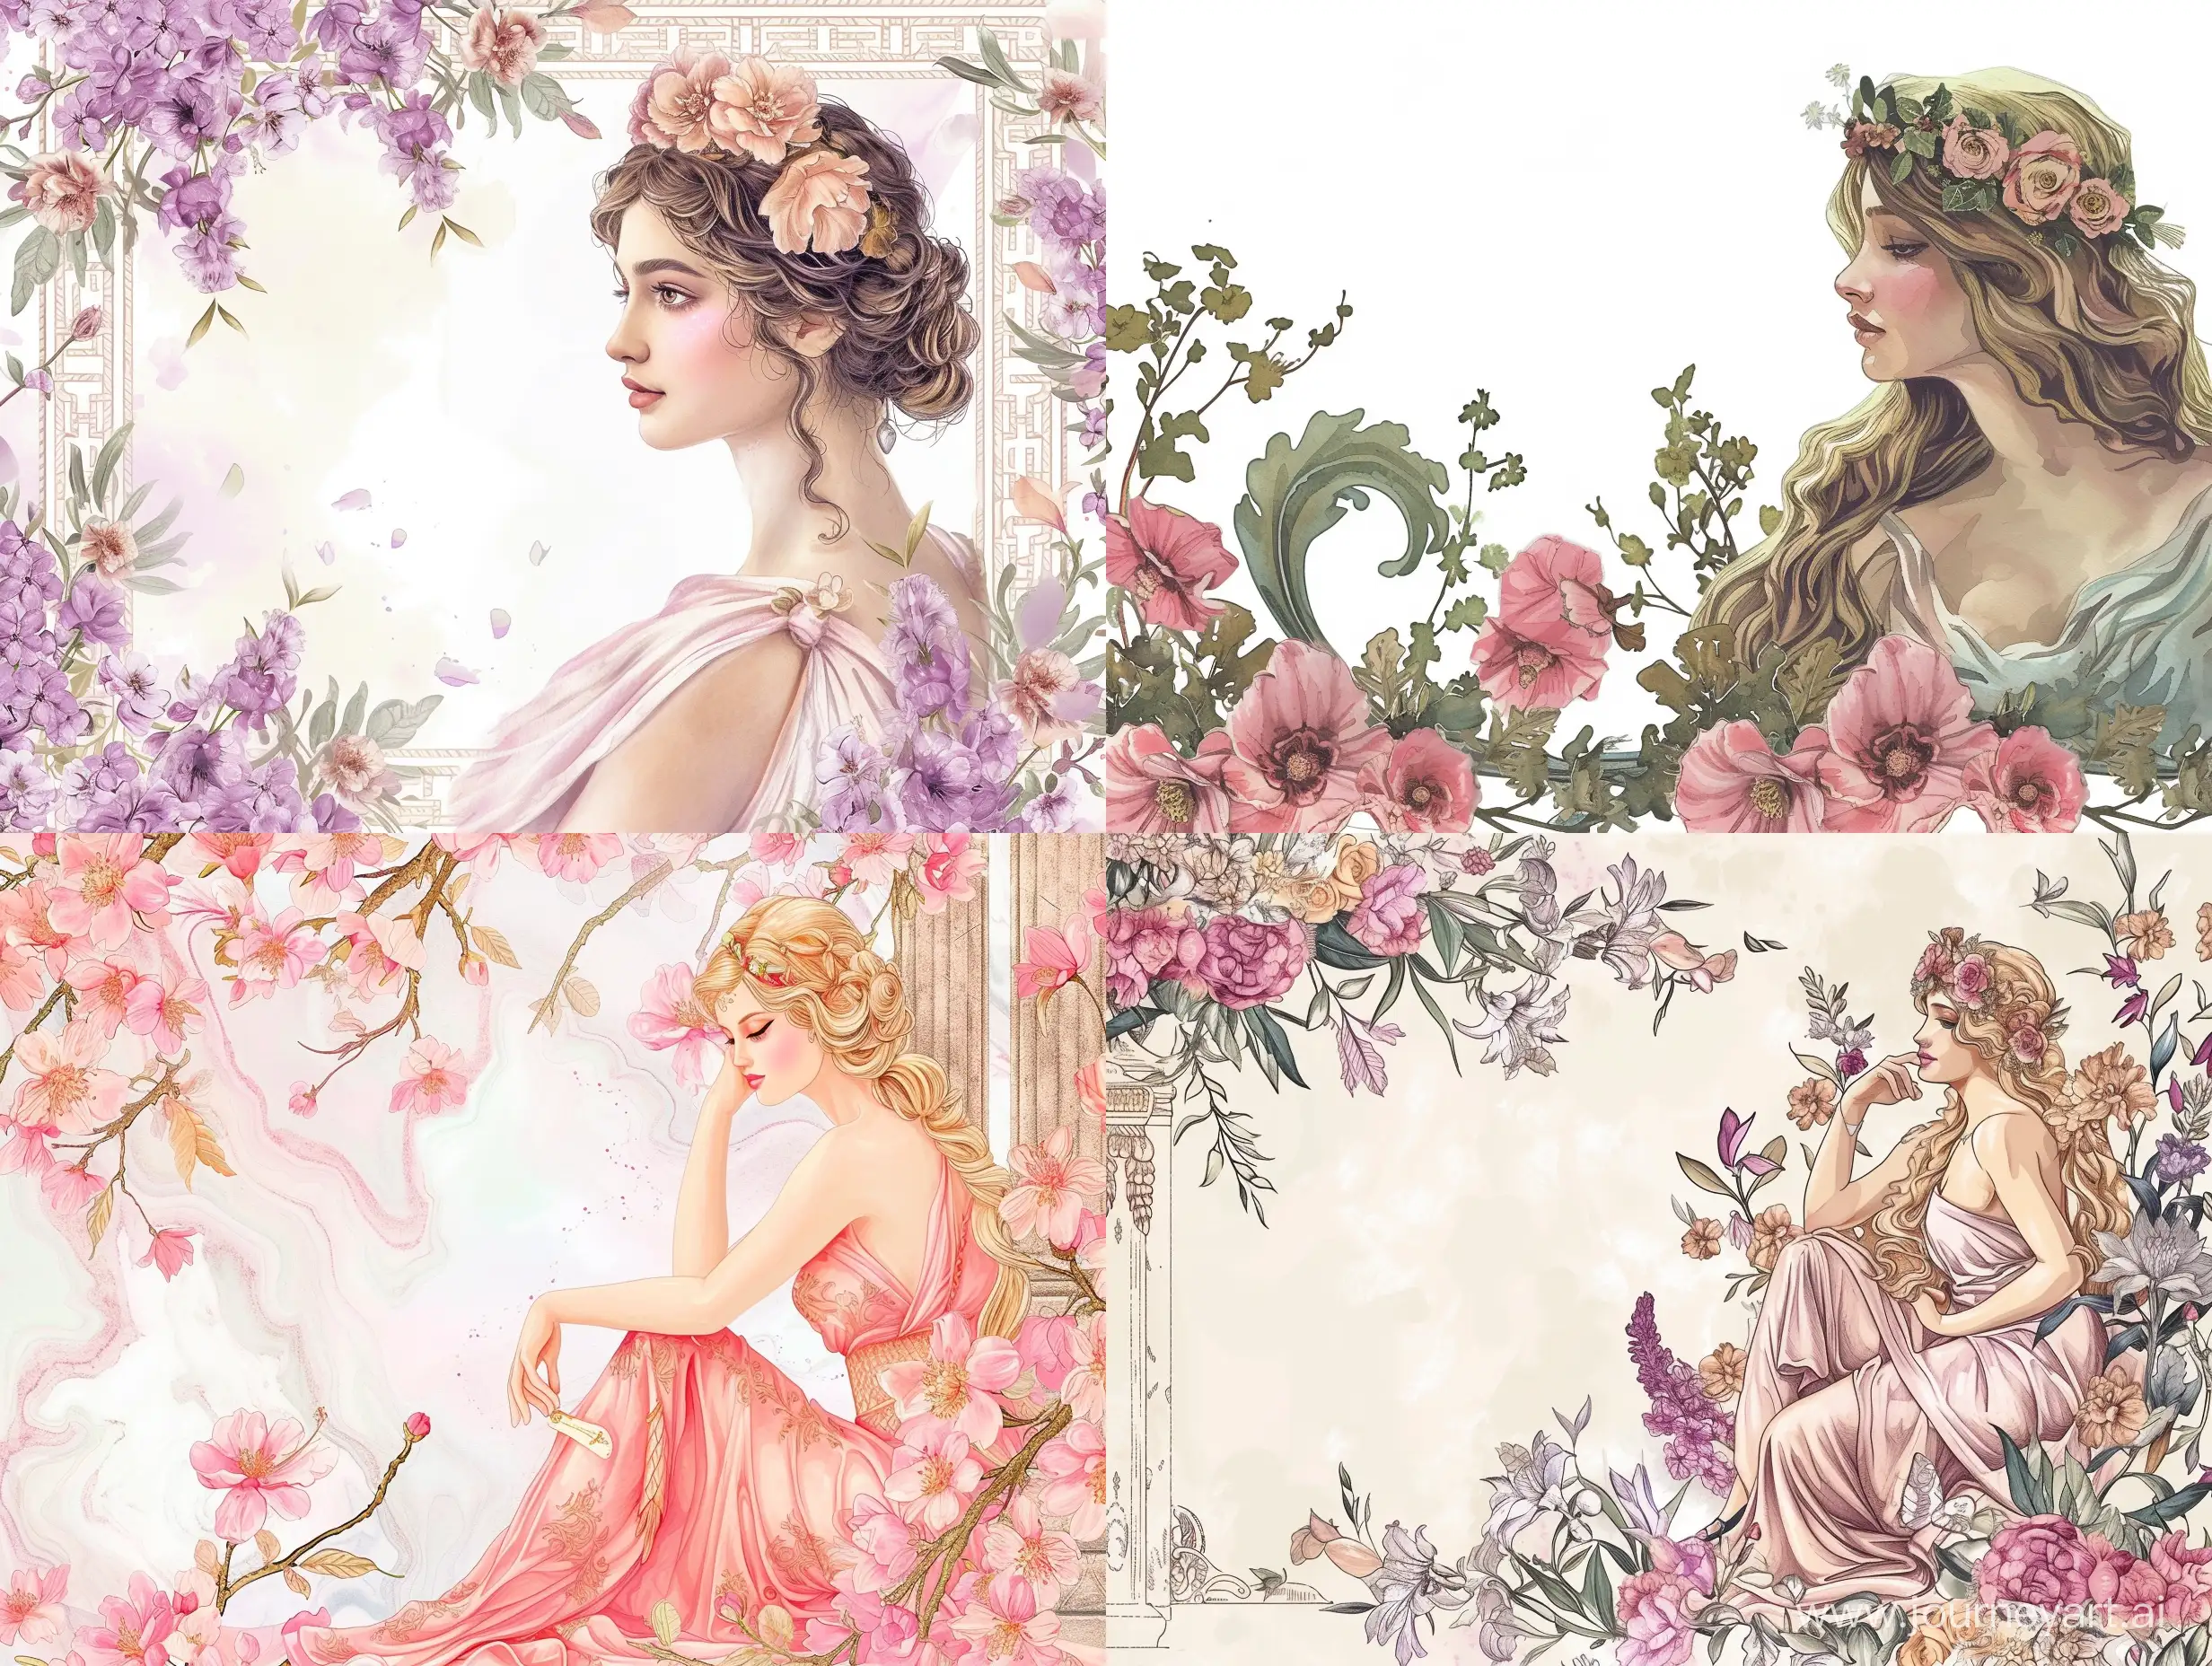 Ancient background, ornamental, dedicated to Aphrodite, about love, beauty, spring, flowers, heartfelt affection, watercolor style, many details, Barbie style --v 6 --ar 4:3 --no 32315